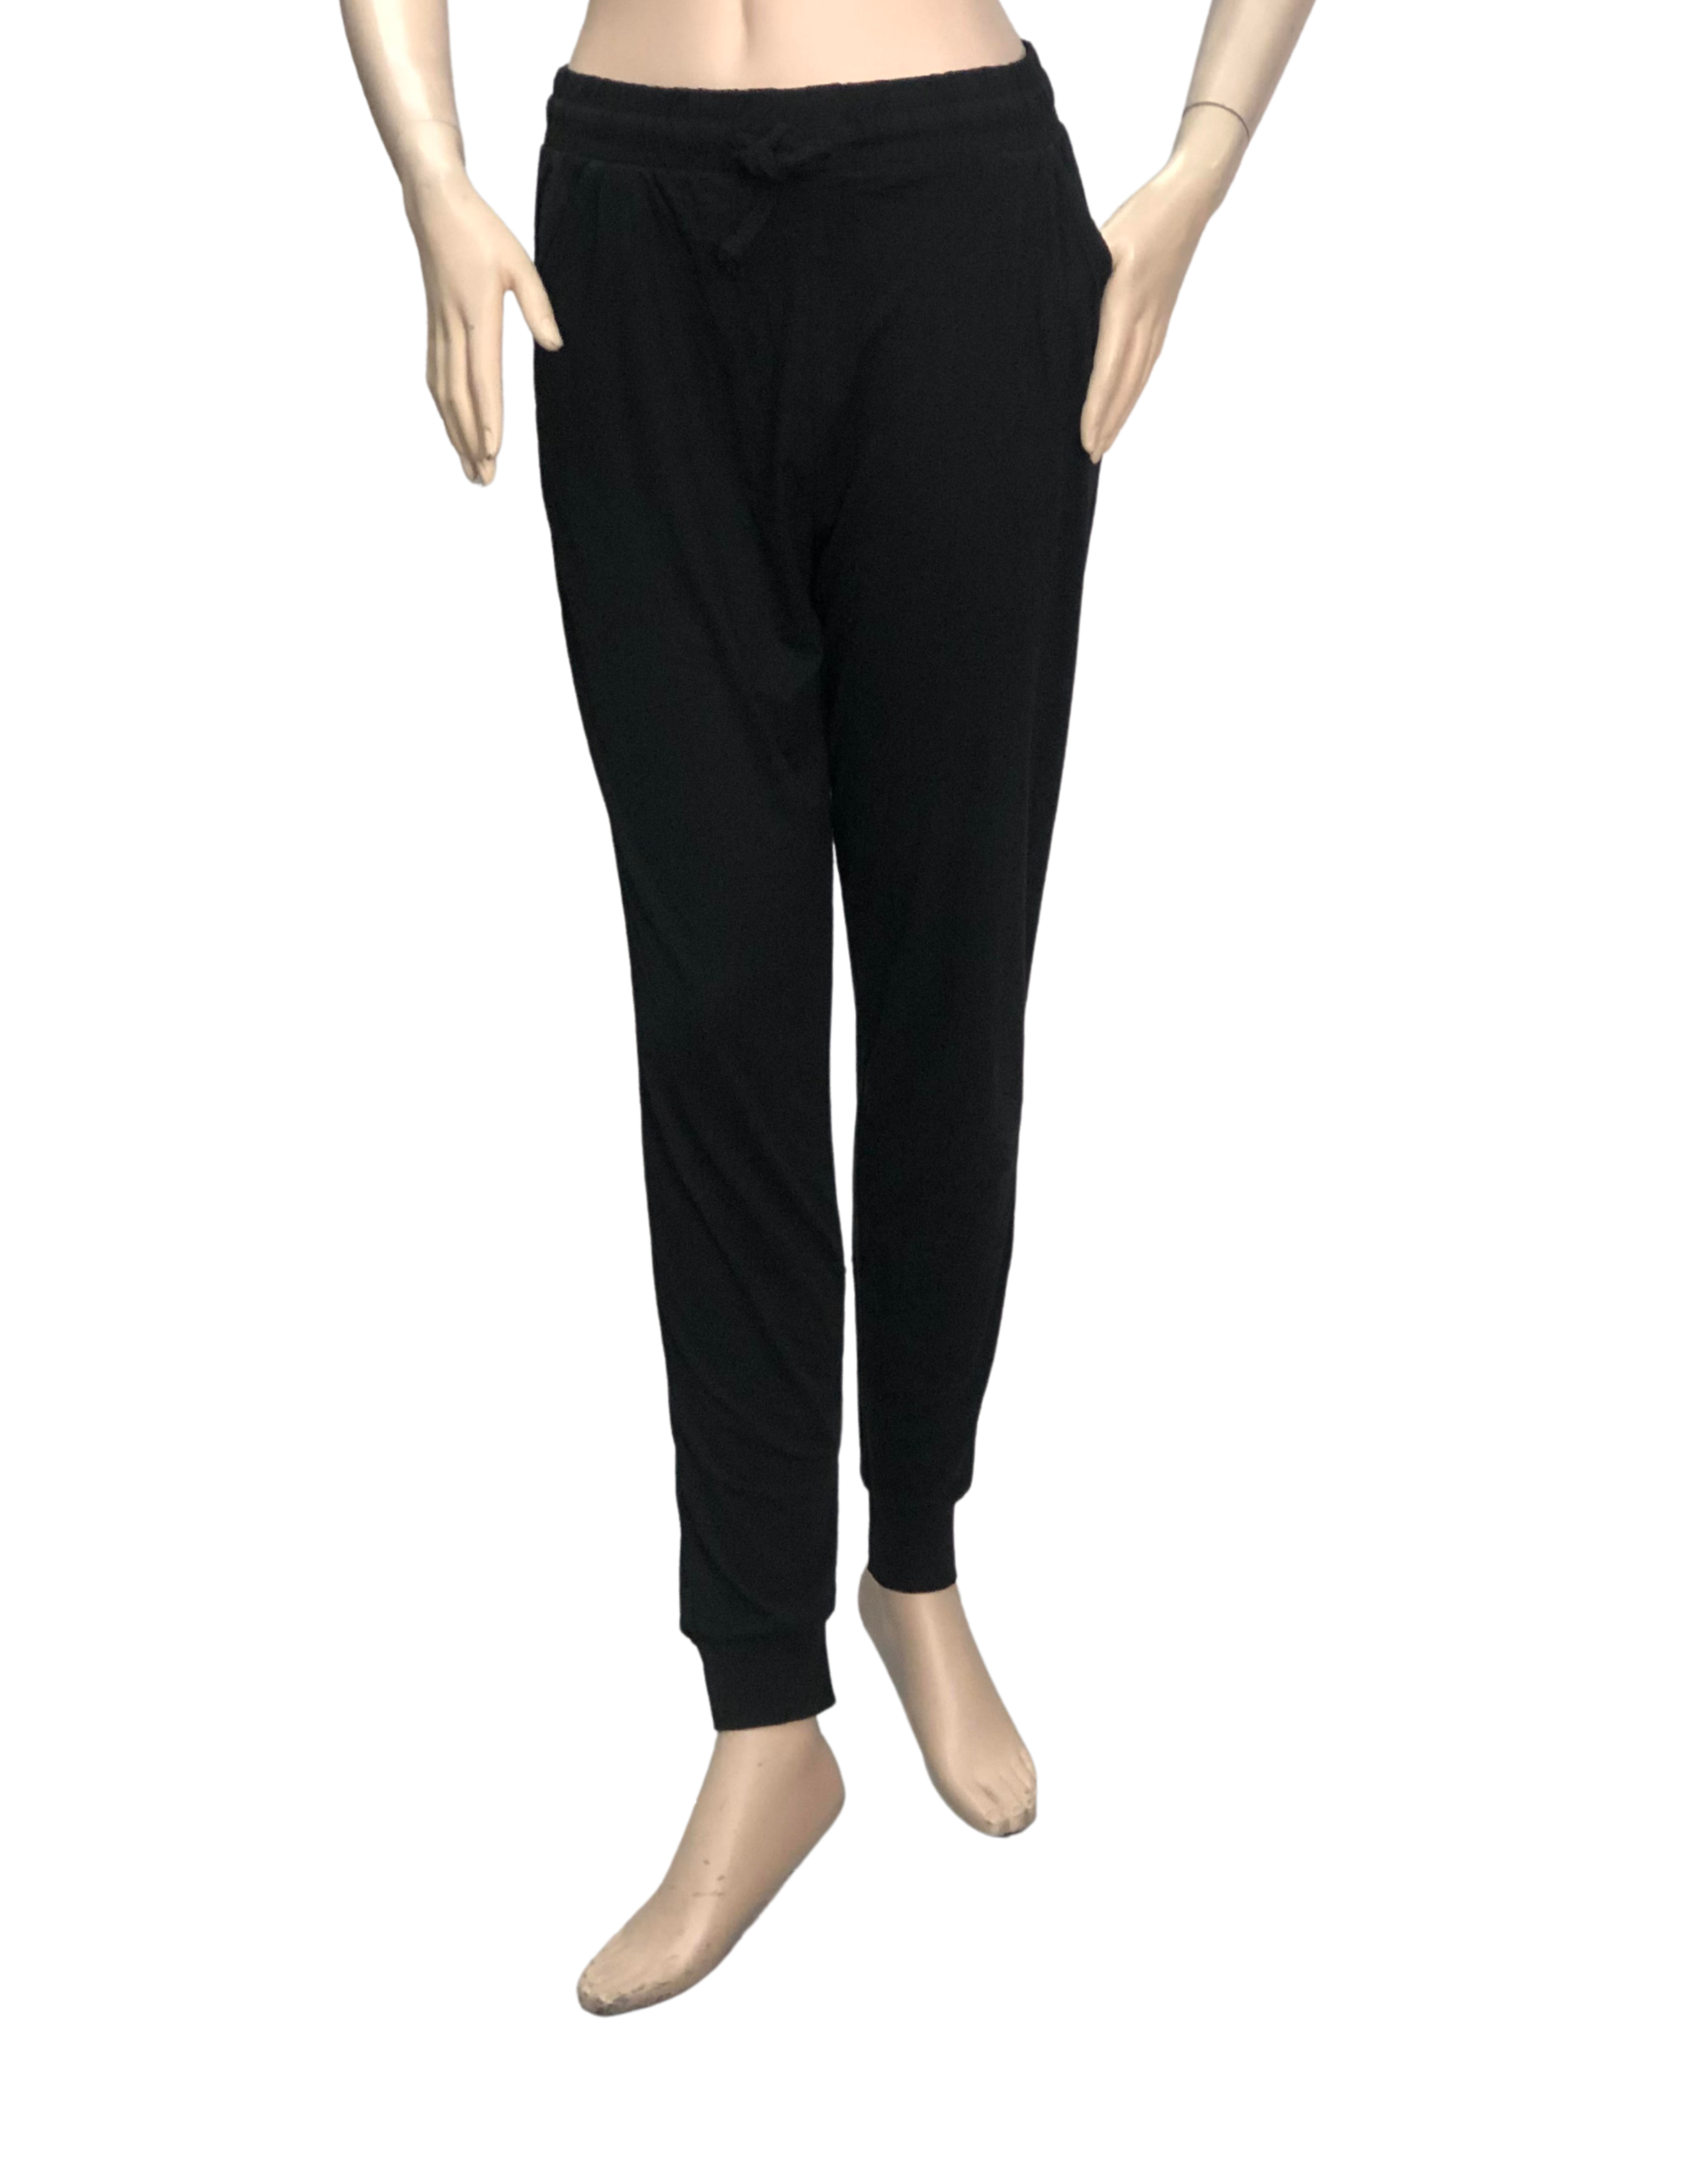 FASHQUE - Relaxed-Fit Jogger Pant with pocket - Imported - P219JK